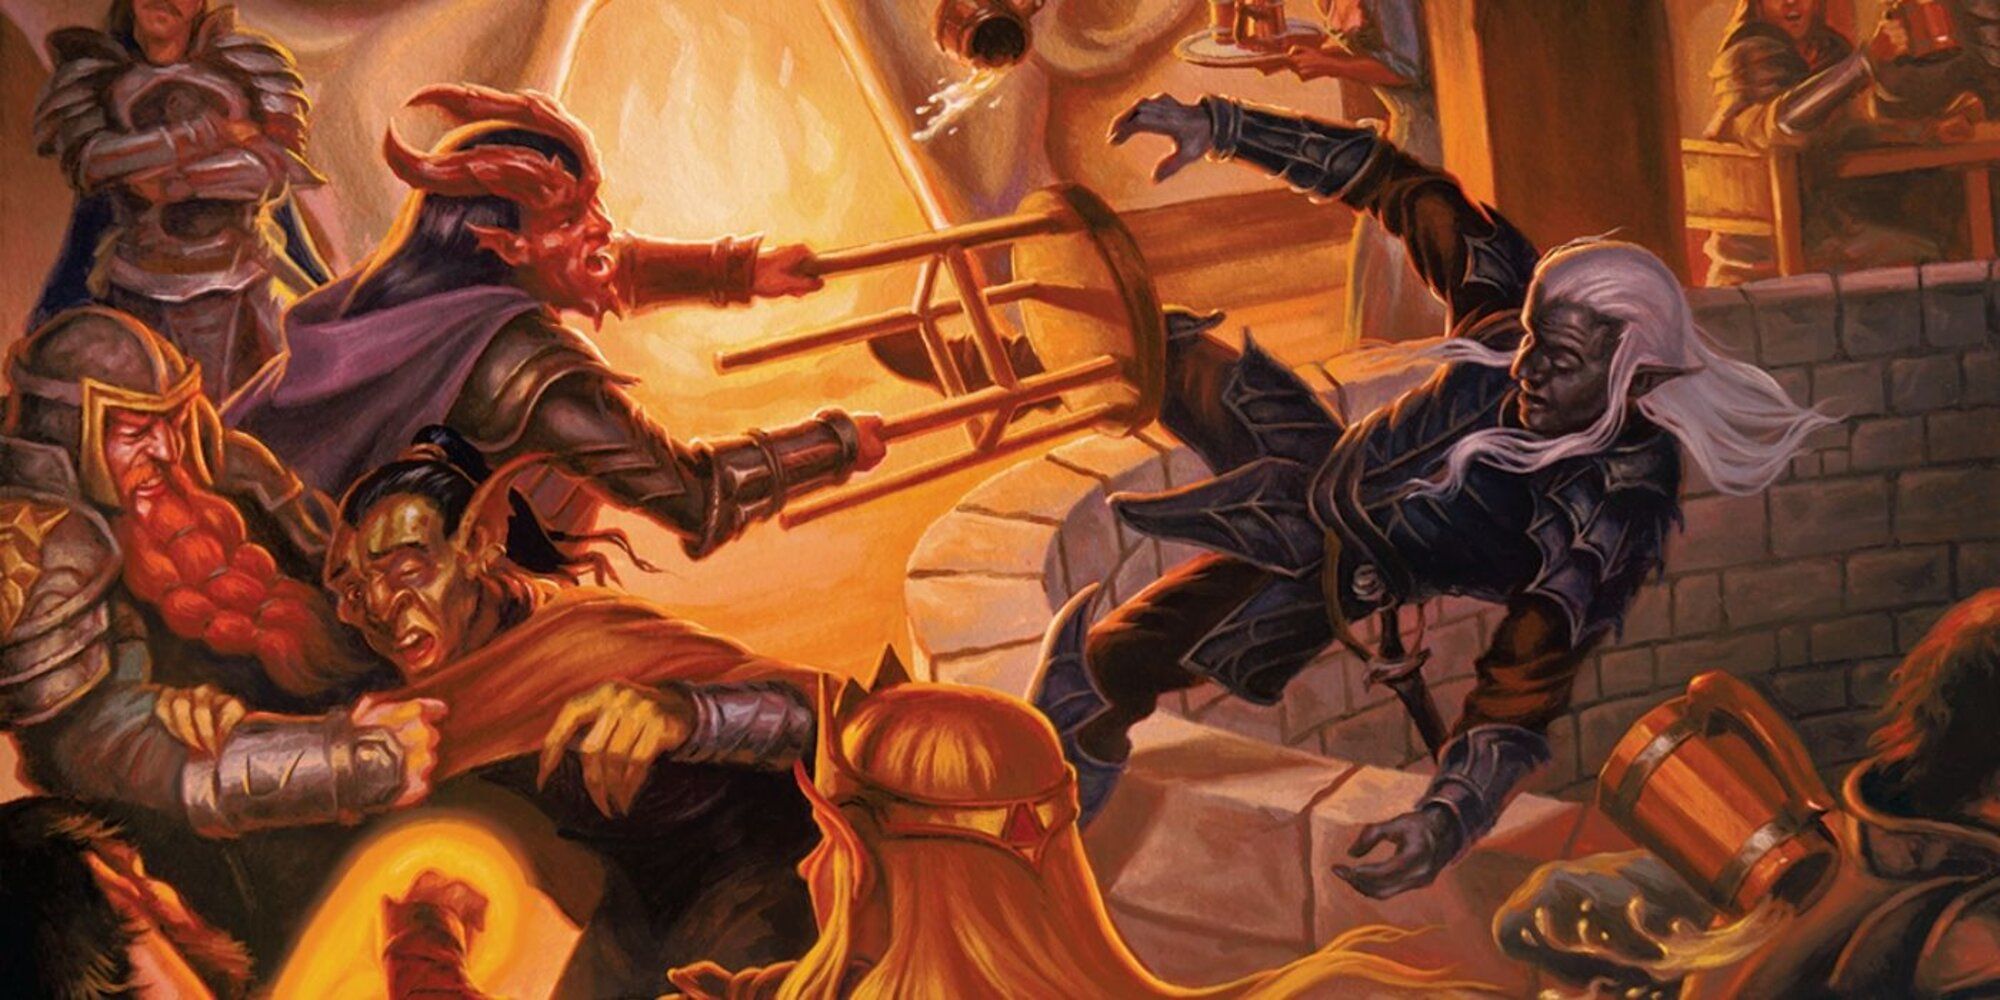 Dungeons & Dragons - Drow Avoids Chair Swung By Tiefling during a tavern brawl